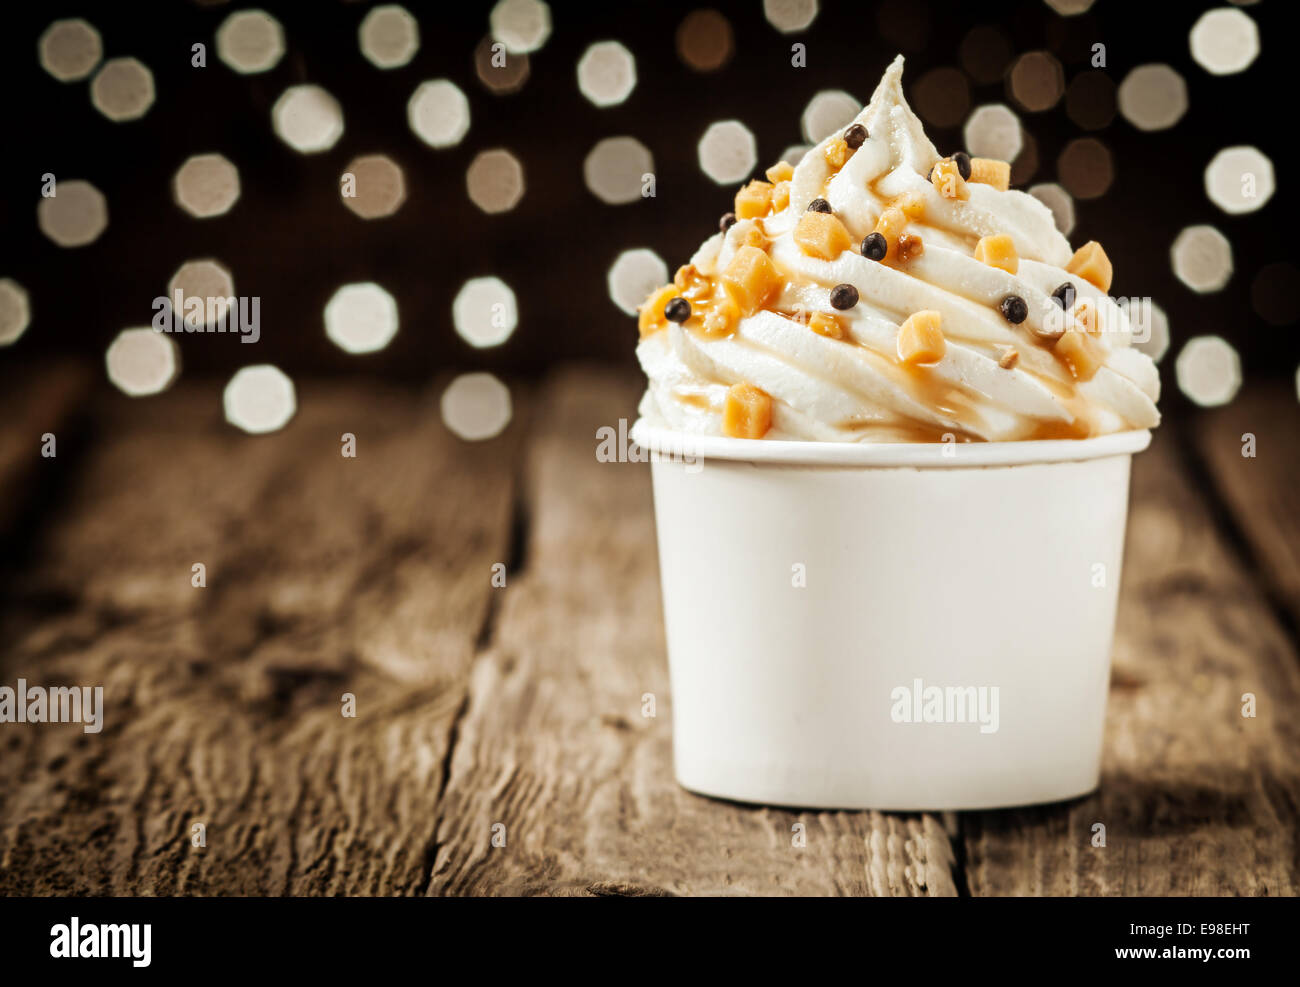 Delicious frozen yogurt party dessert twirled in a tub and decorated with sprinkles against a sparkling bokeh of festive lights Stock Photo